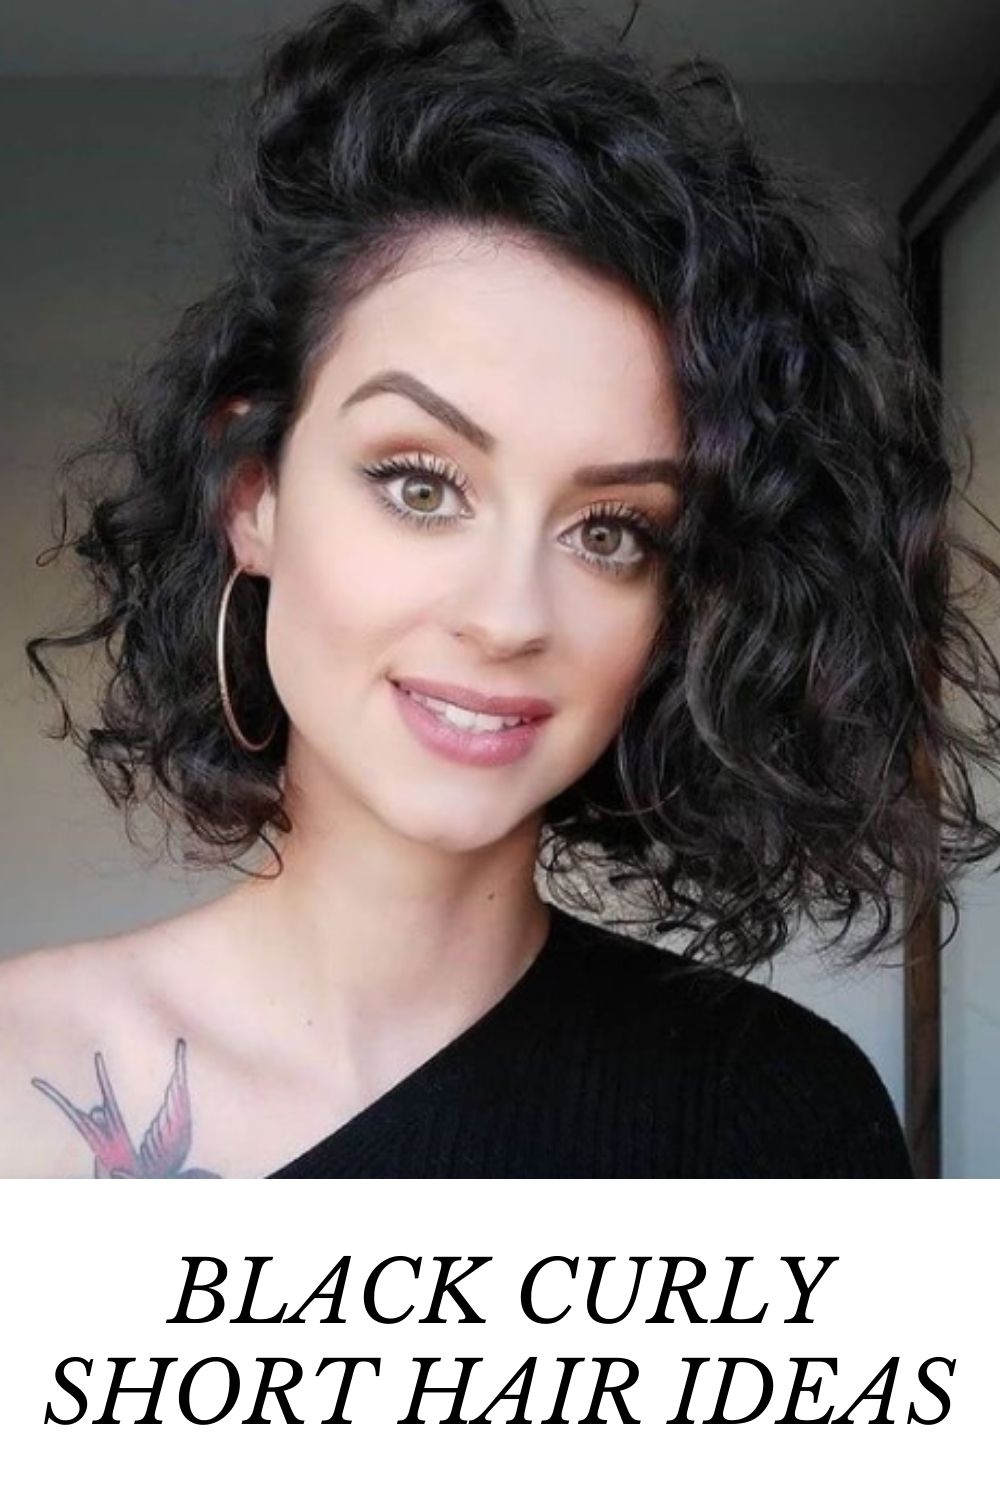 What Hairstyles Go With Short Curly Hairstyle?